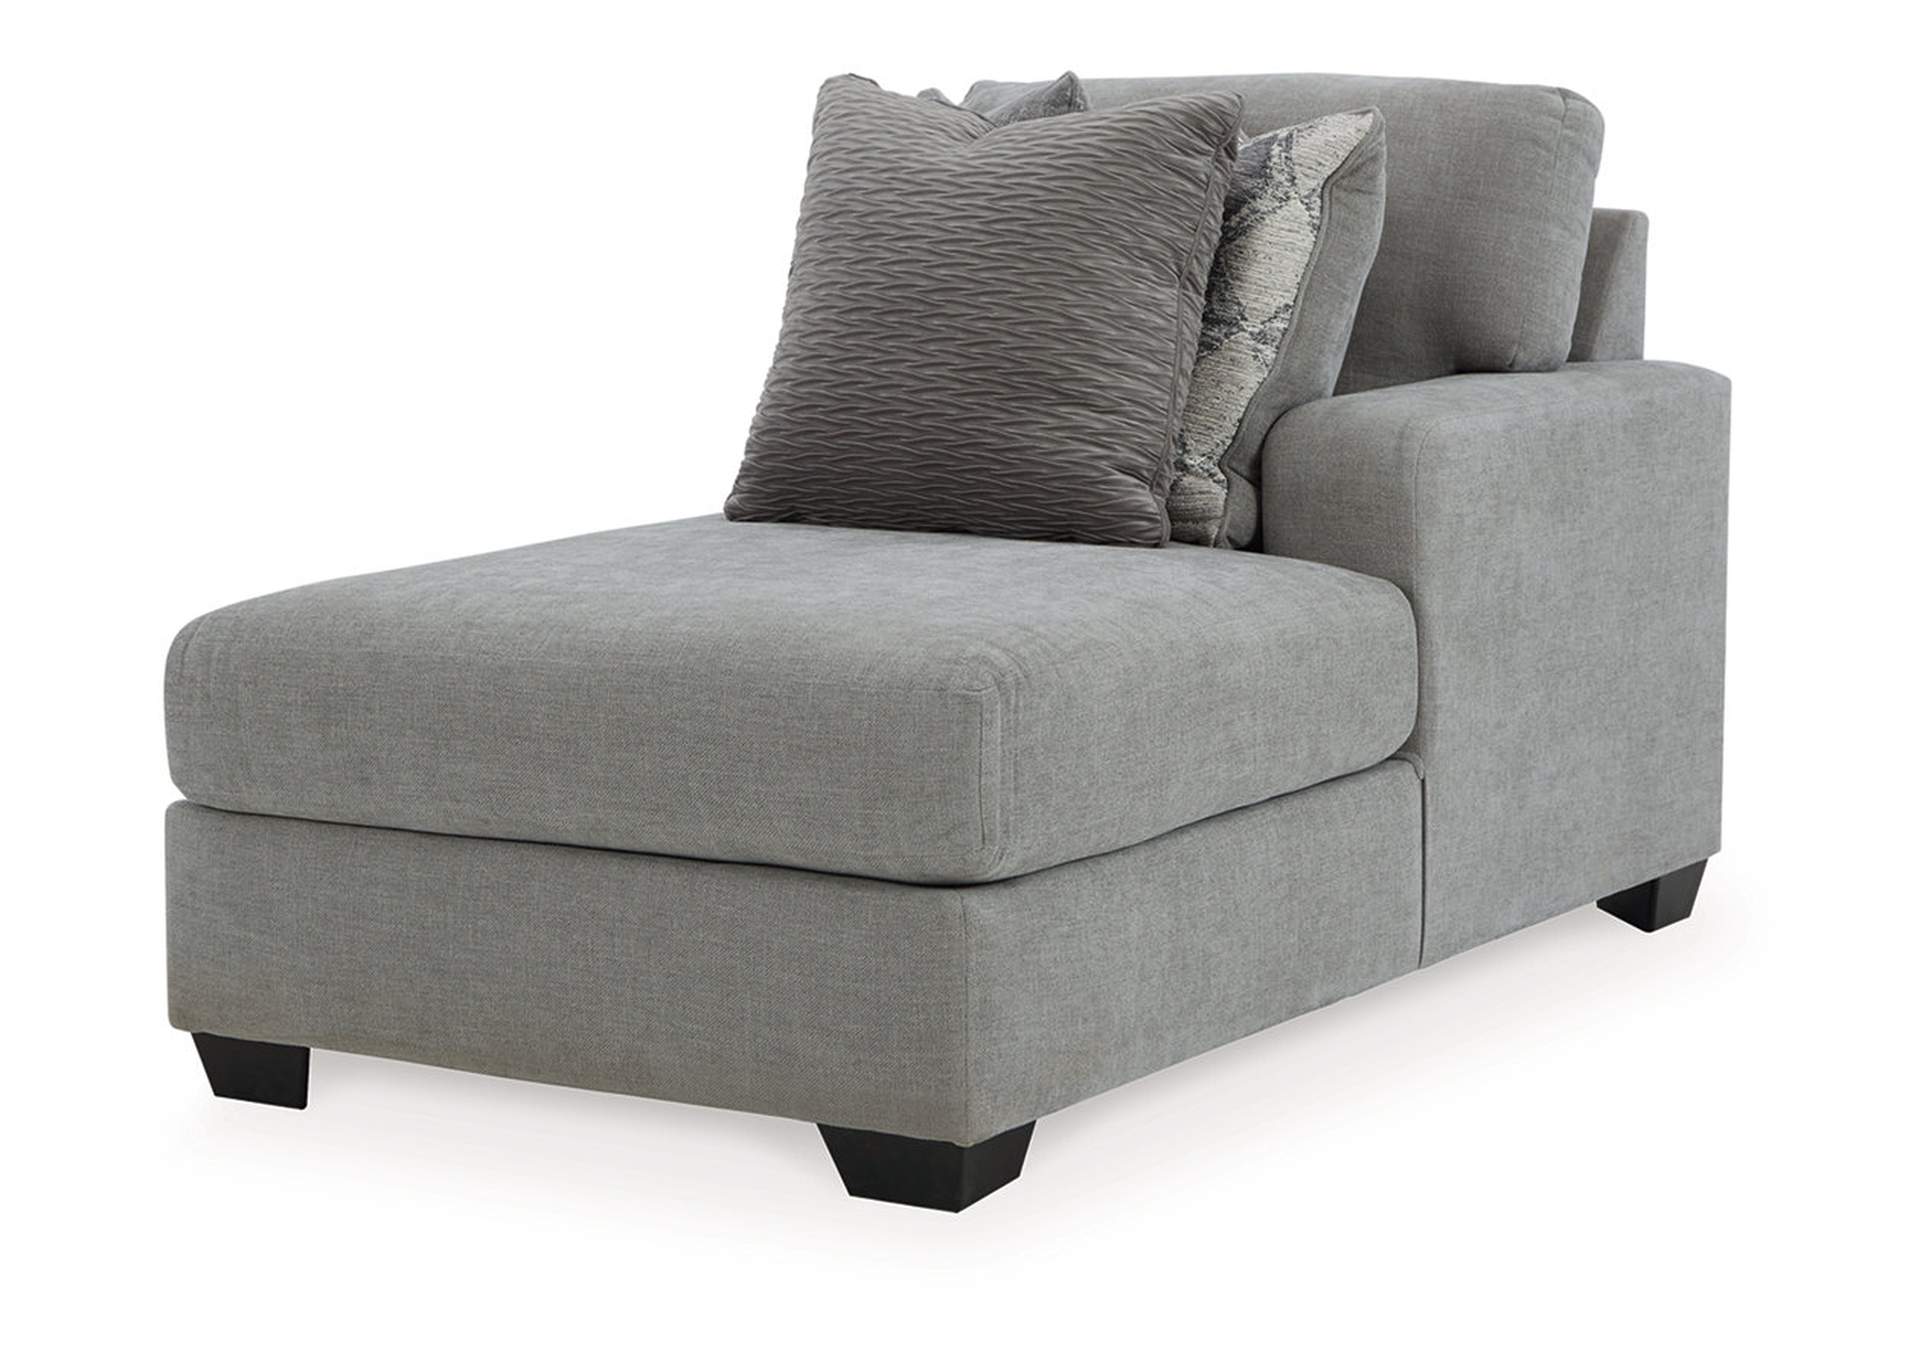 Keener 2-Piece Sectional with Ottoman,Ashley